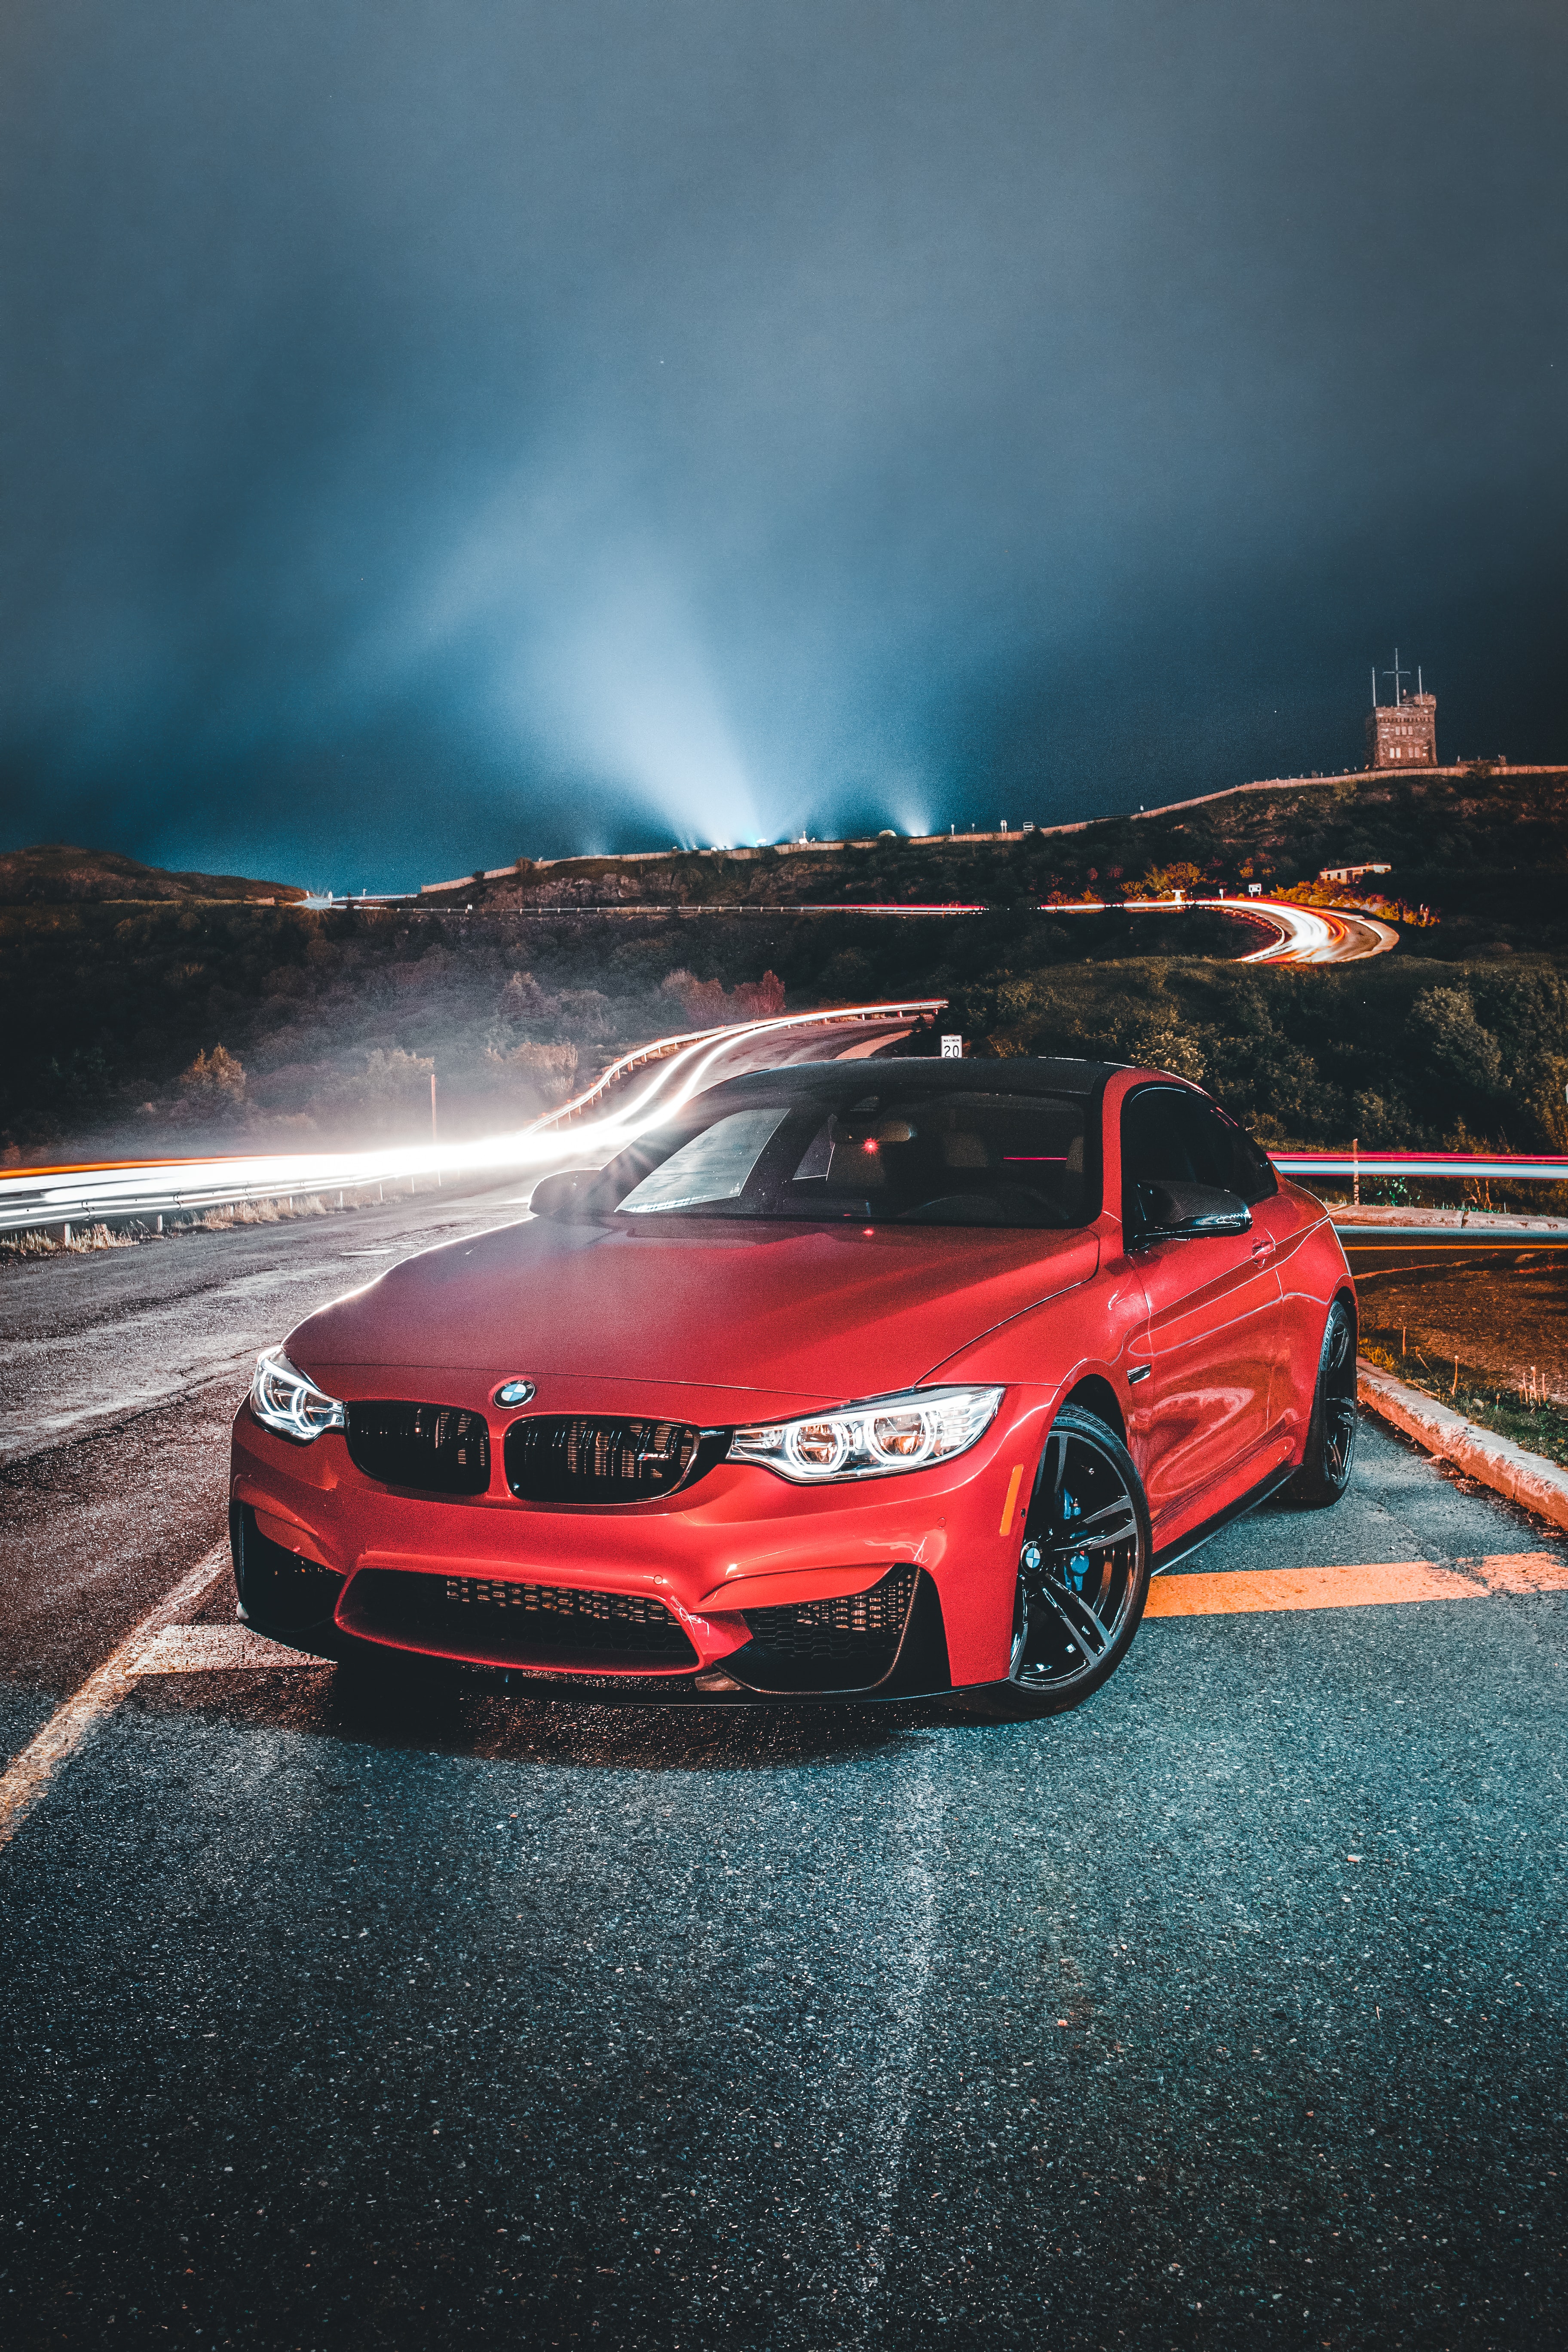 bmw, bmw 320i, cars, front view, machine, red, road, car